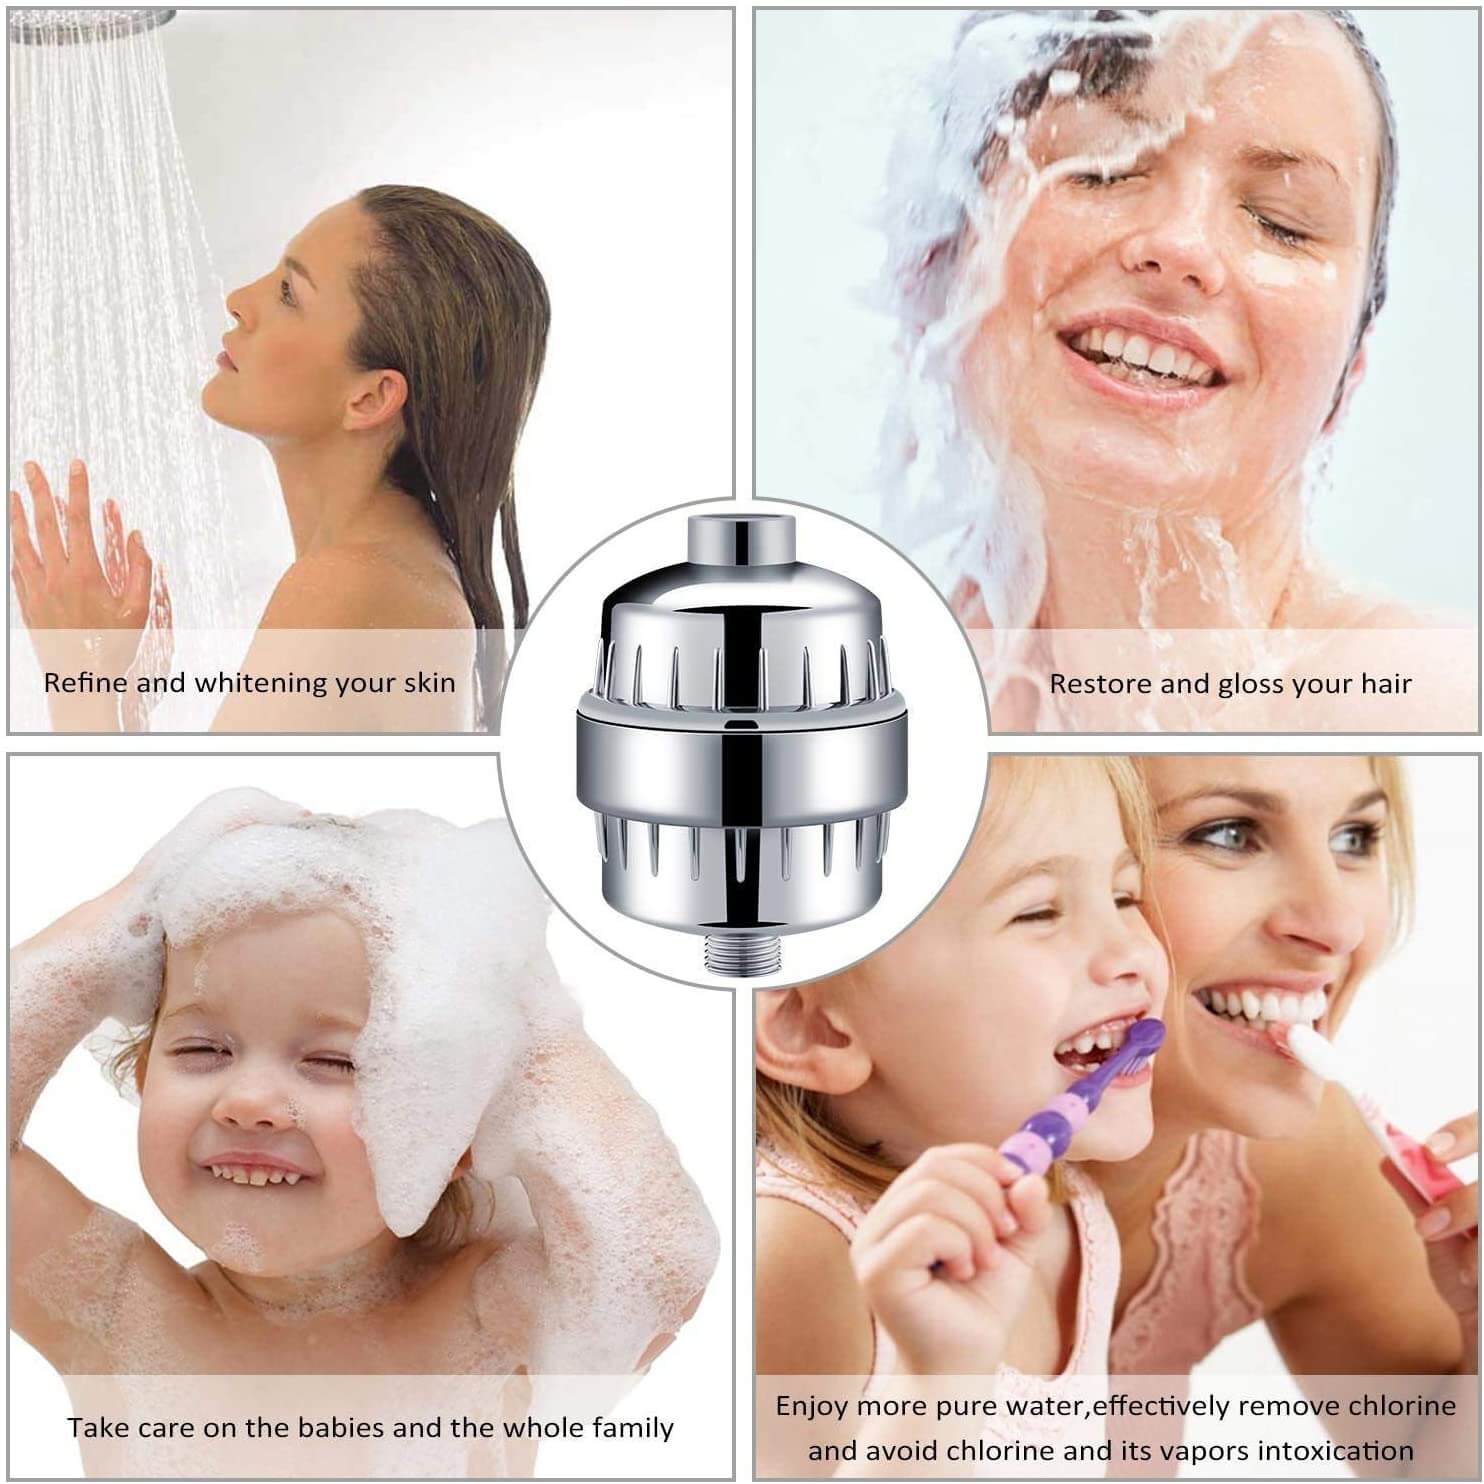 Benefits of using a shower filter